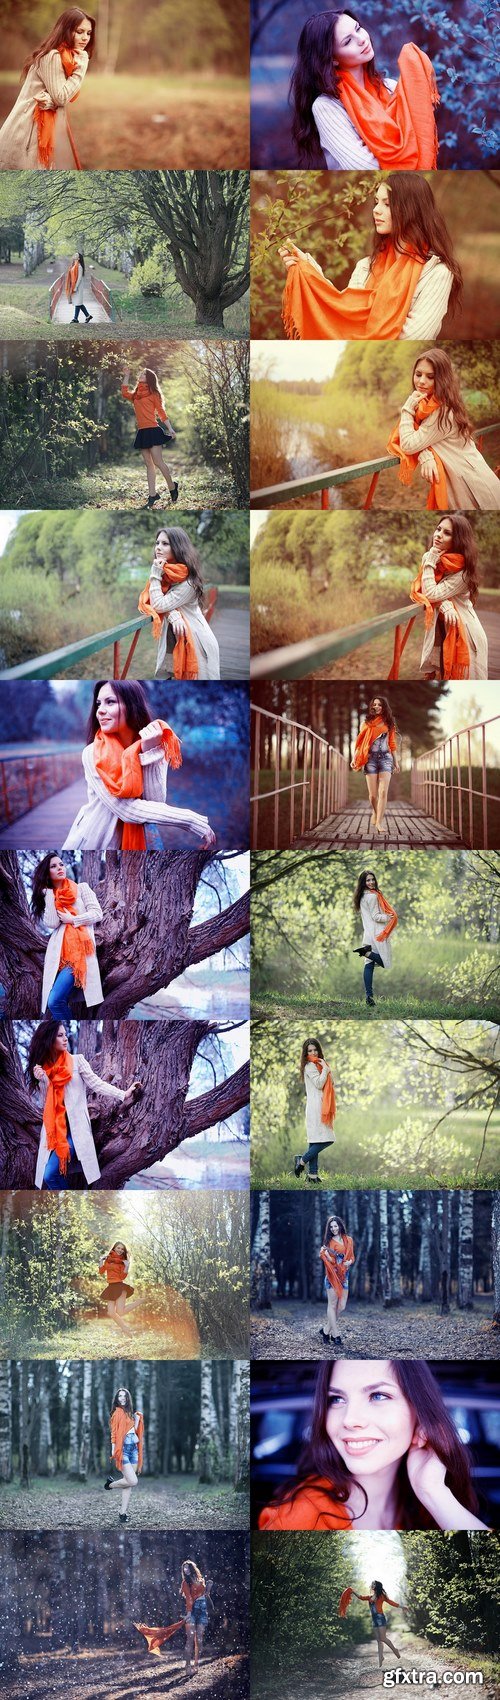 Young girl in an orange scarf on a walk in the park